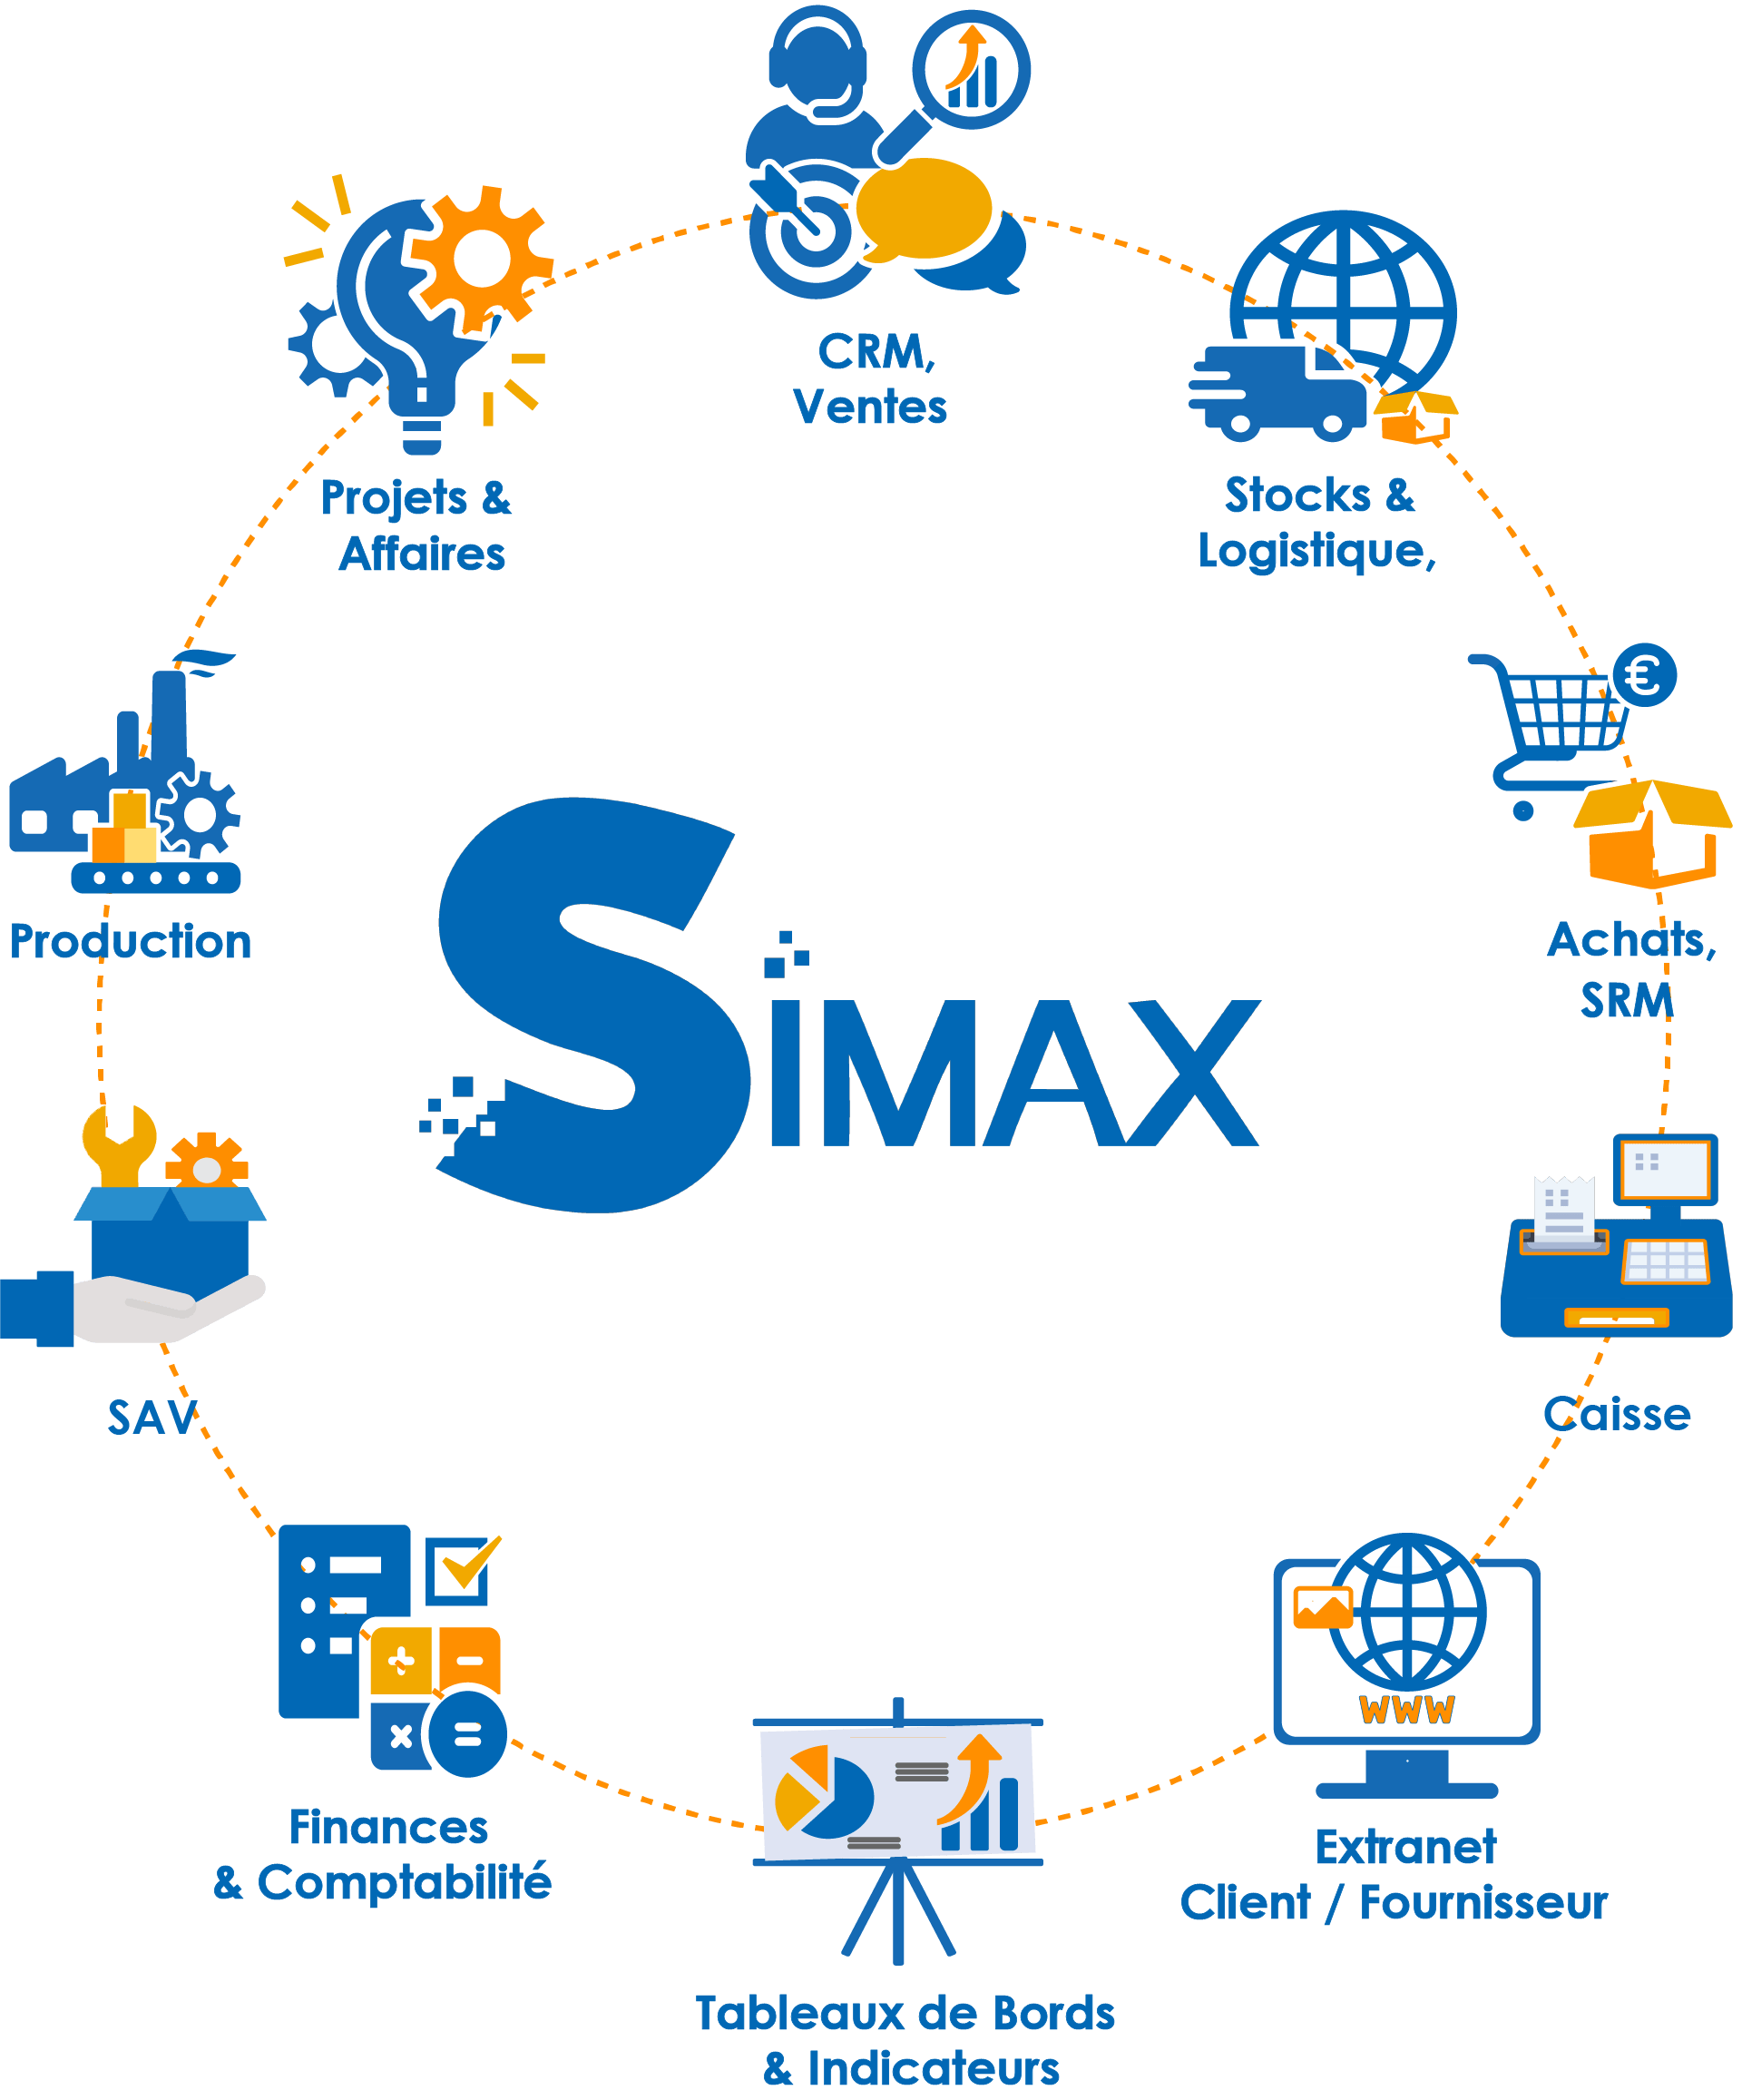 NOUT -  Solutions SIMAX™ - Accueil